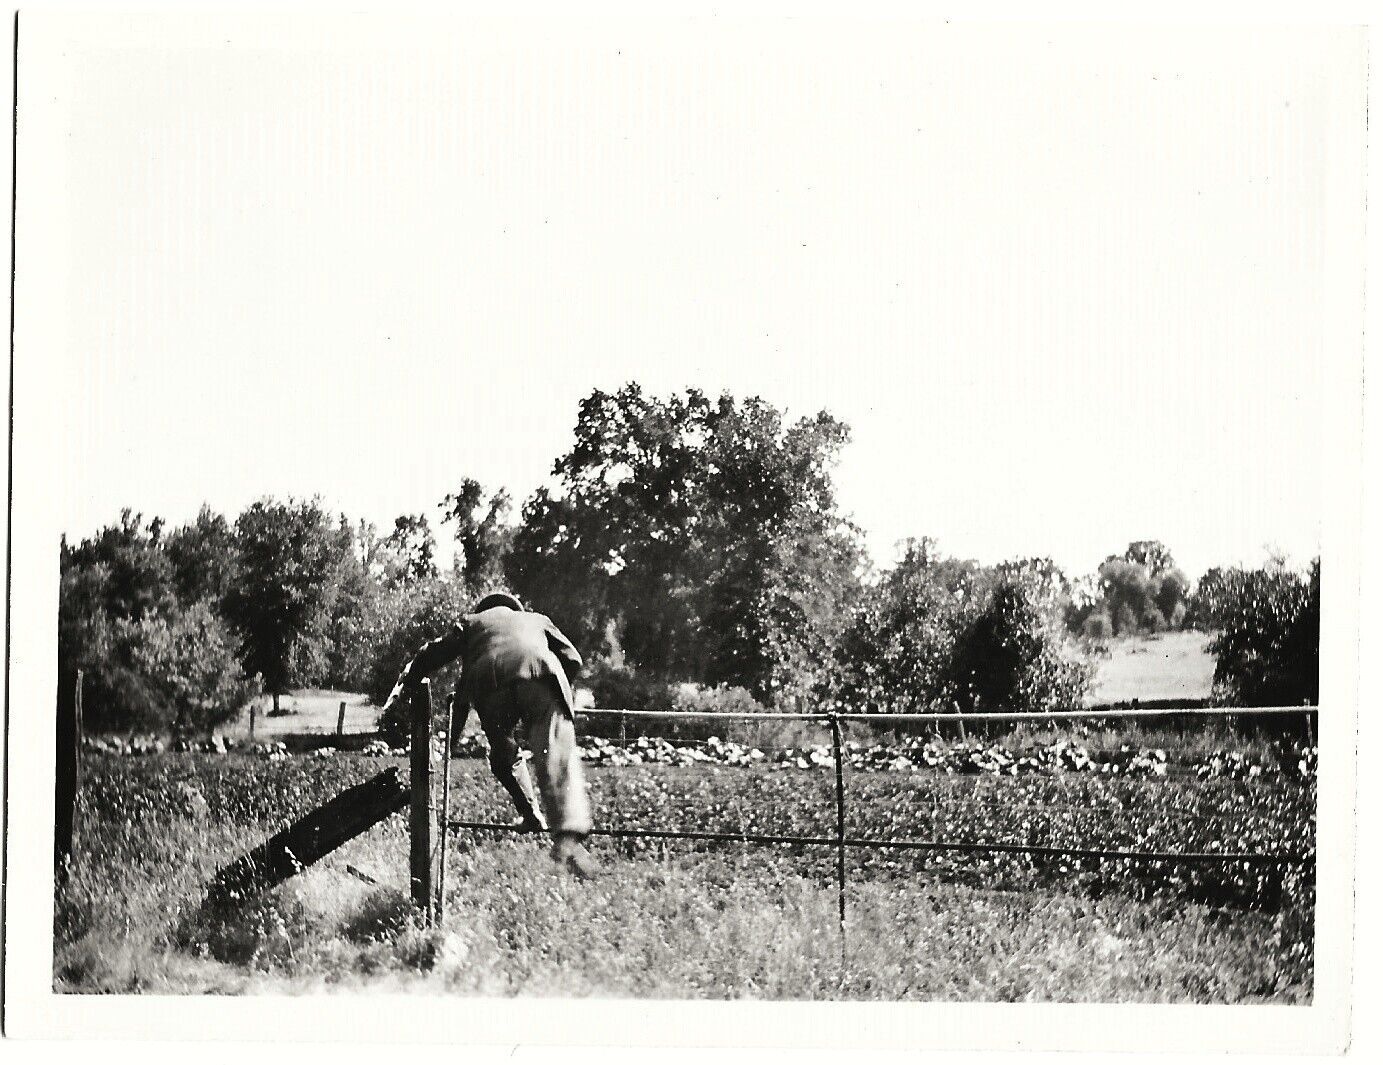 Vintage Old 1930's Abstract Photo of Man Jumping over Metal Rod Fence in Field 